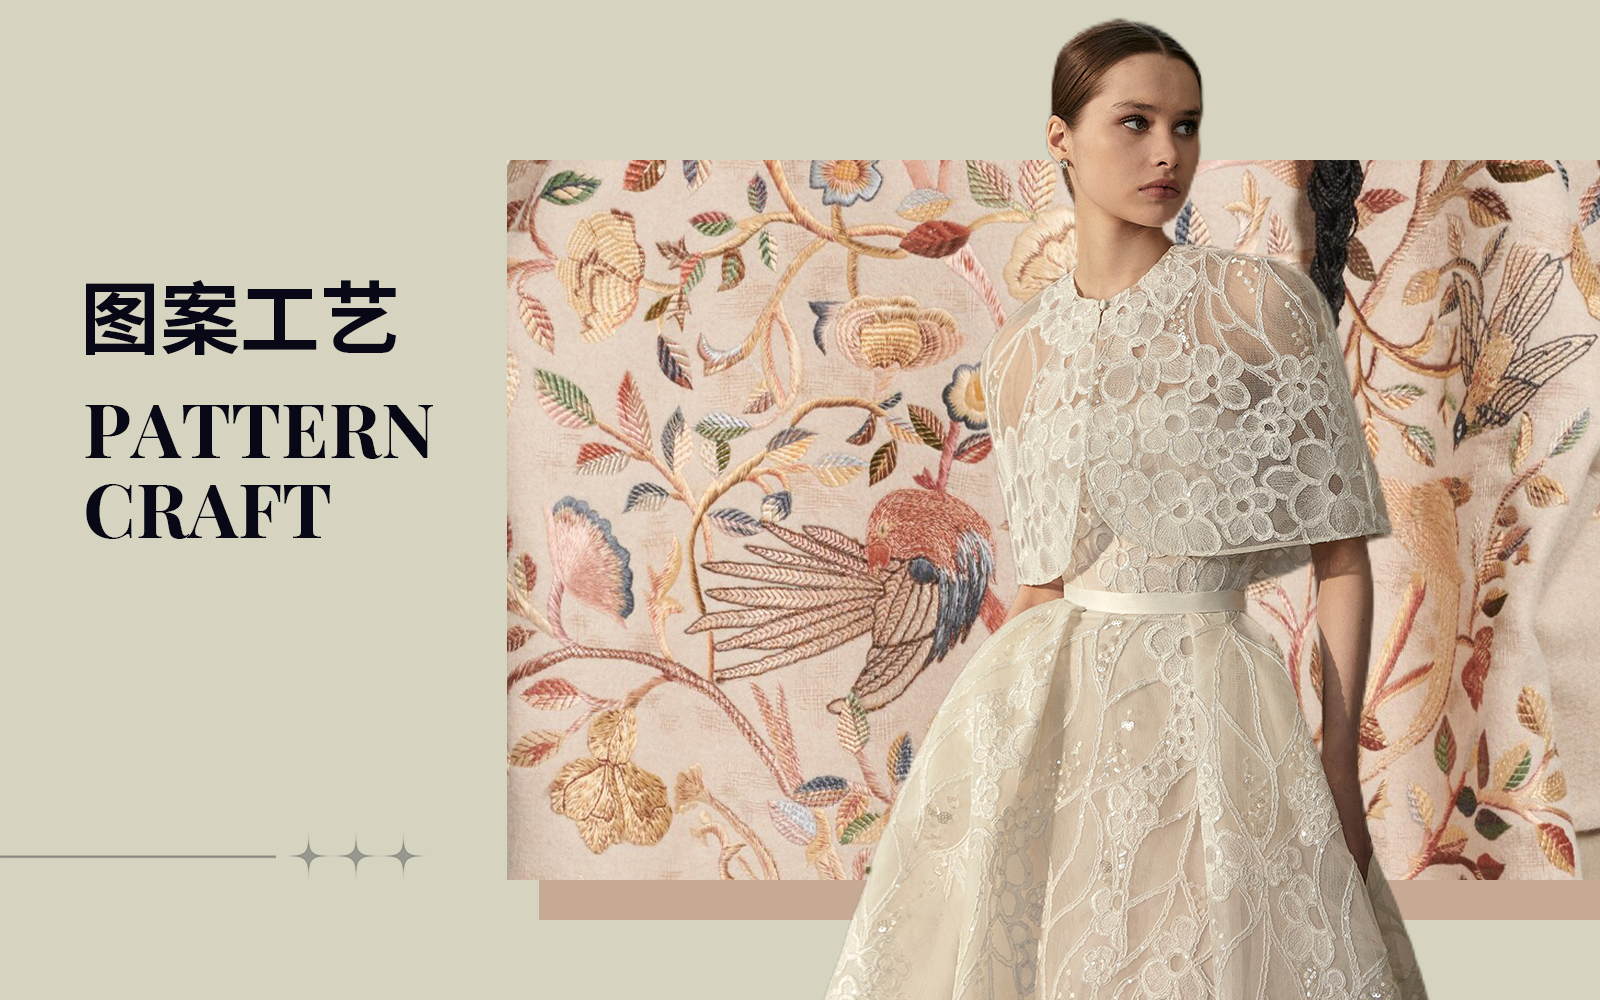 New Embroidery -- The Pattern Craft Trend for Women's Wedding Dress